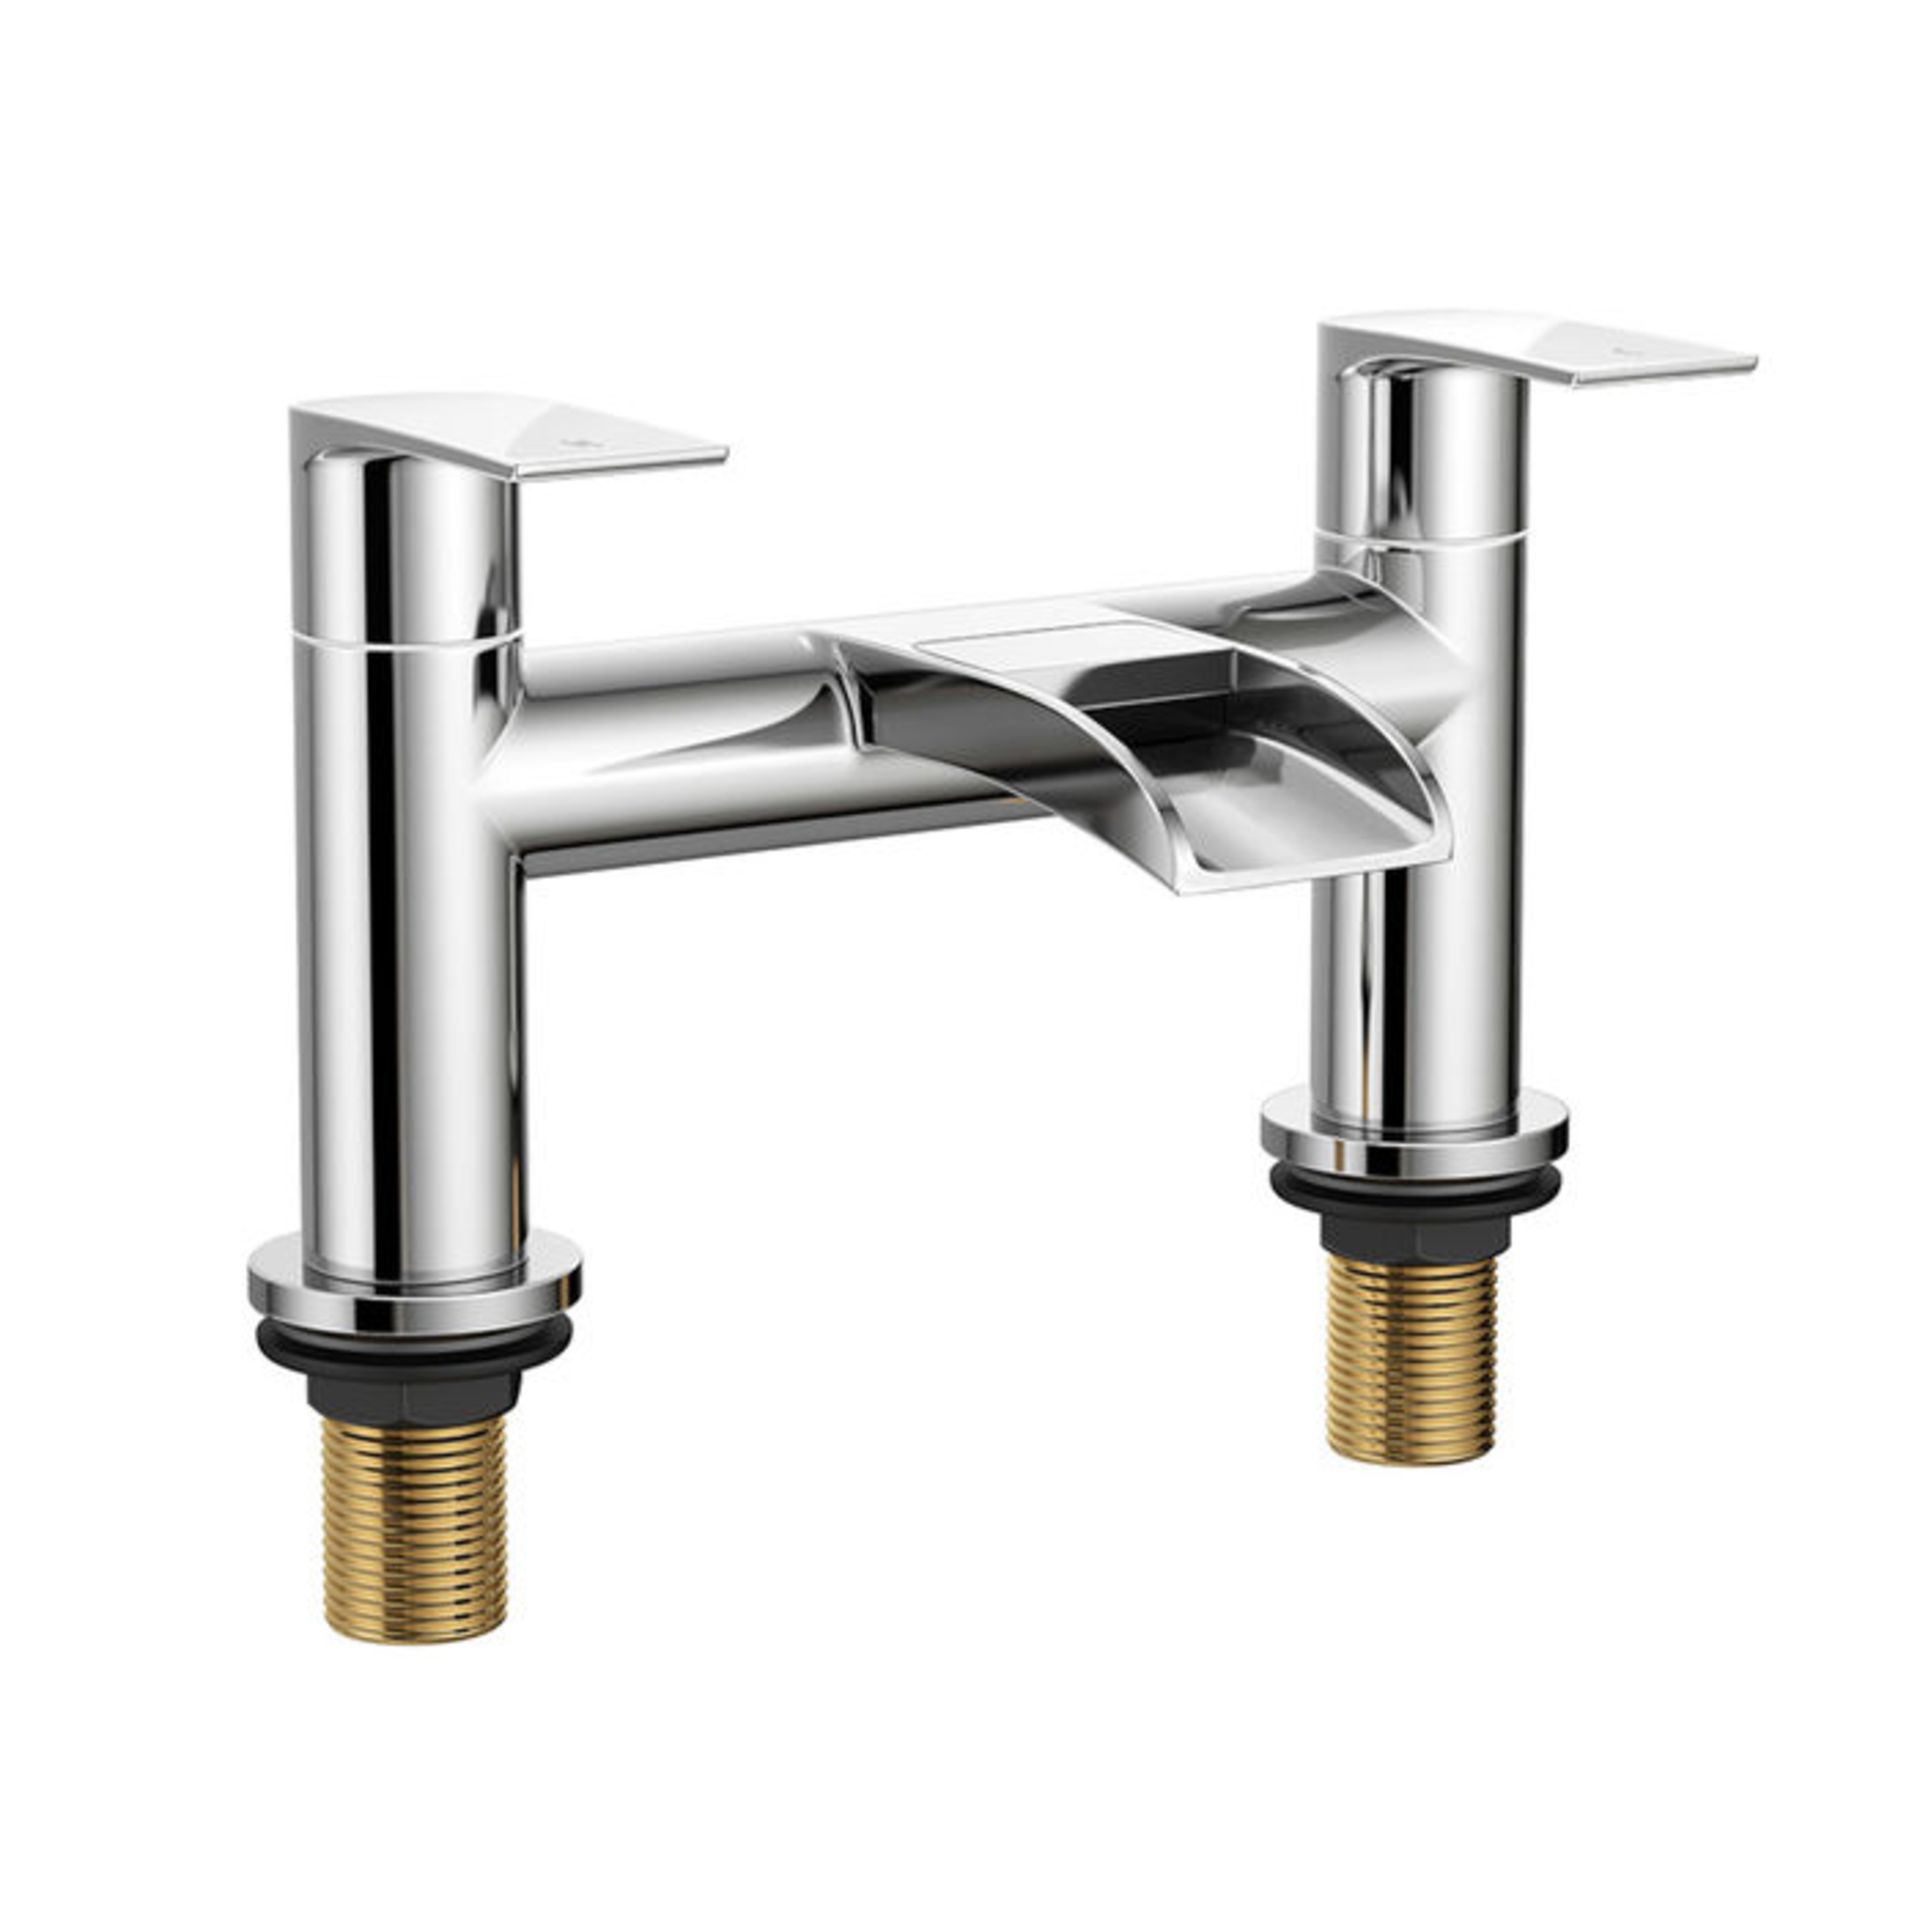 (PA80) Denver Waterfall Bath Filler Mixer Tap Chrome Plated Solid Brass 1/4 turn solid brass valve - Image 2 of 2